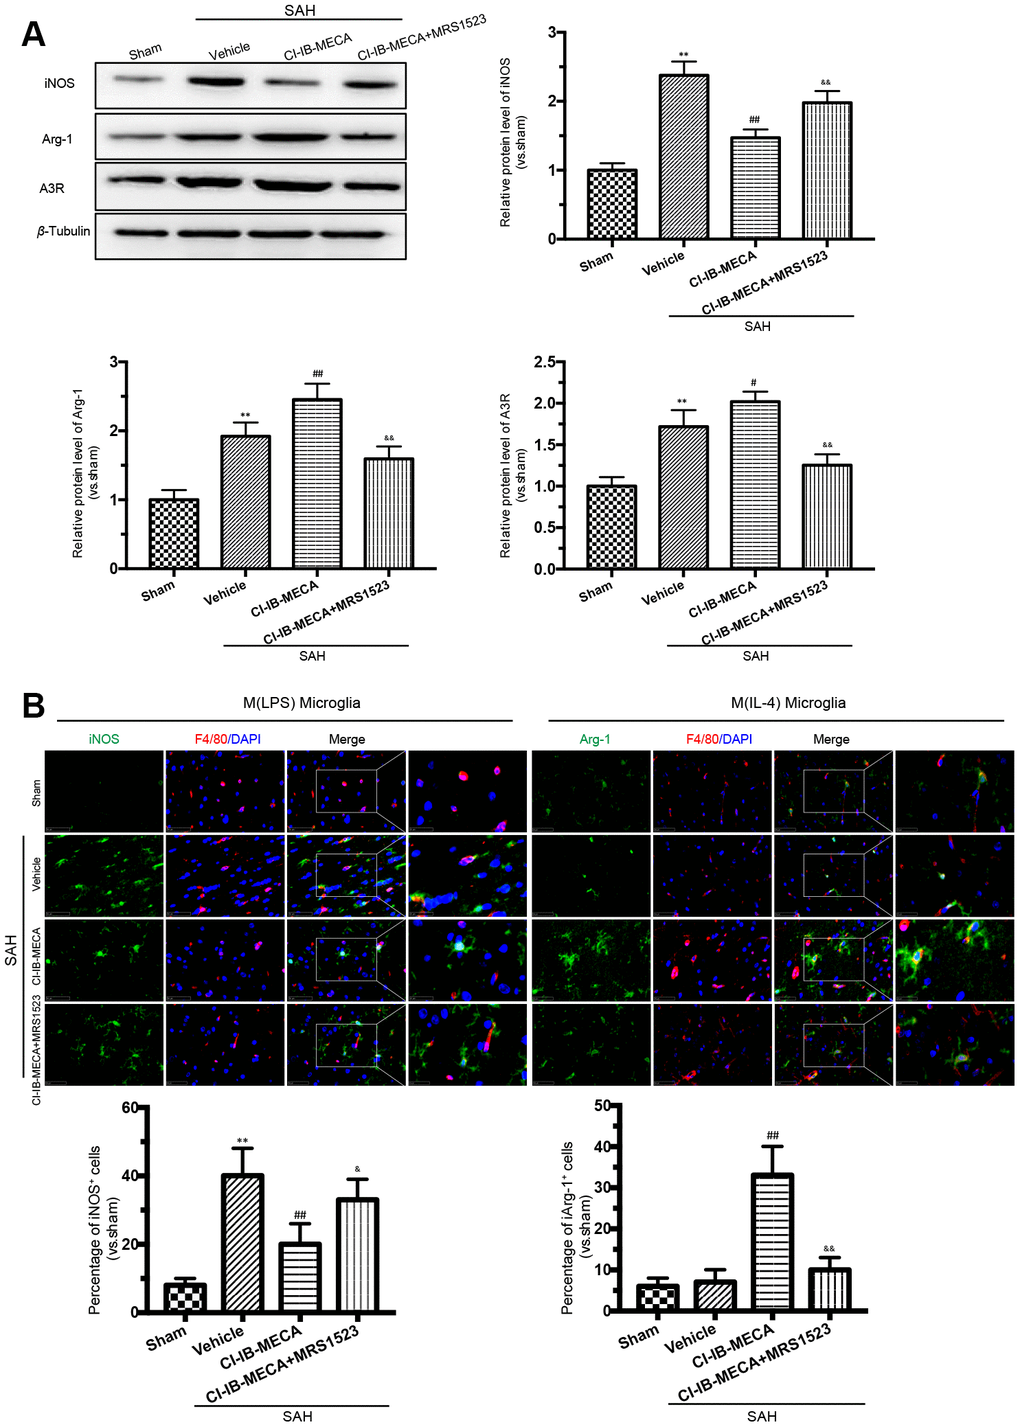 A3R agonist CI-IB-MECA promotes microglia towards to the M(IL-4) phenotype in rat 24 h after SAH. (A) Western blot analysis showing the expression of iNOS and Arg-1 after injection of CI-IB-MECA with or without MRS1523 24 h after SAH. A3R protein expression increased 24 h after SAH and was further increased after CI-IB-MECA treatment, which was partially reversed by the A3R antagonist MRS1523. (B) Immunofluorescence staining showing the M(LPS)-associated marker iNOS or the M(IL-4)-associated marker Arg-1 in the cerebral cortex 24 h after SAH. Both M(LPS) and M(IL-4) microglia were quantified. n=5 in each group. Values are shown as the mean ± SD. **p p p p p 